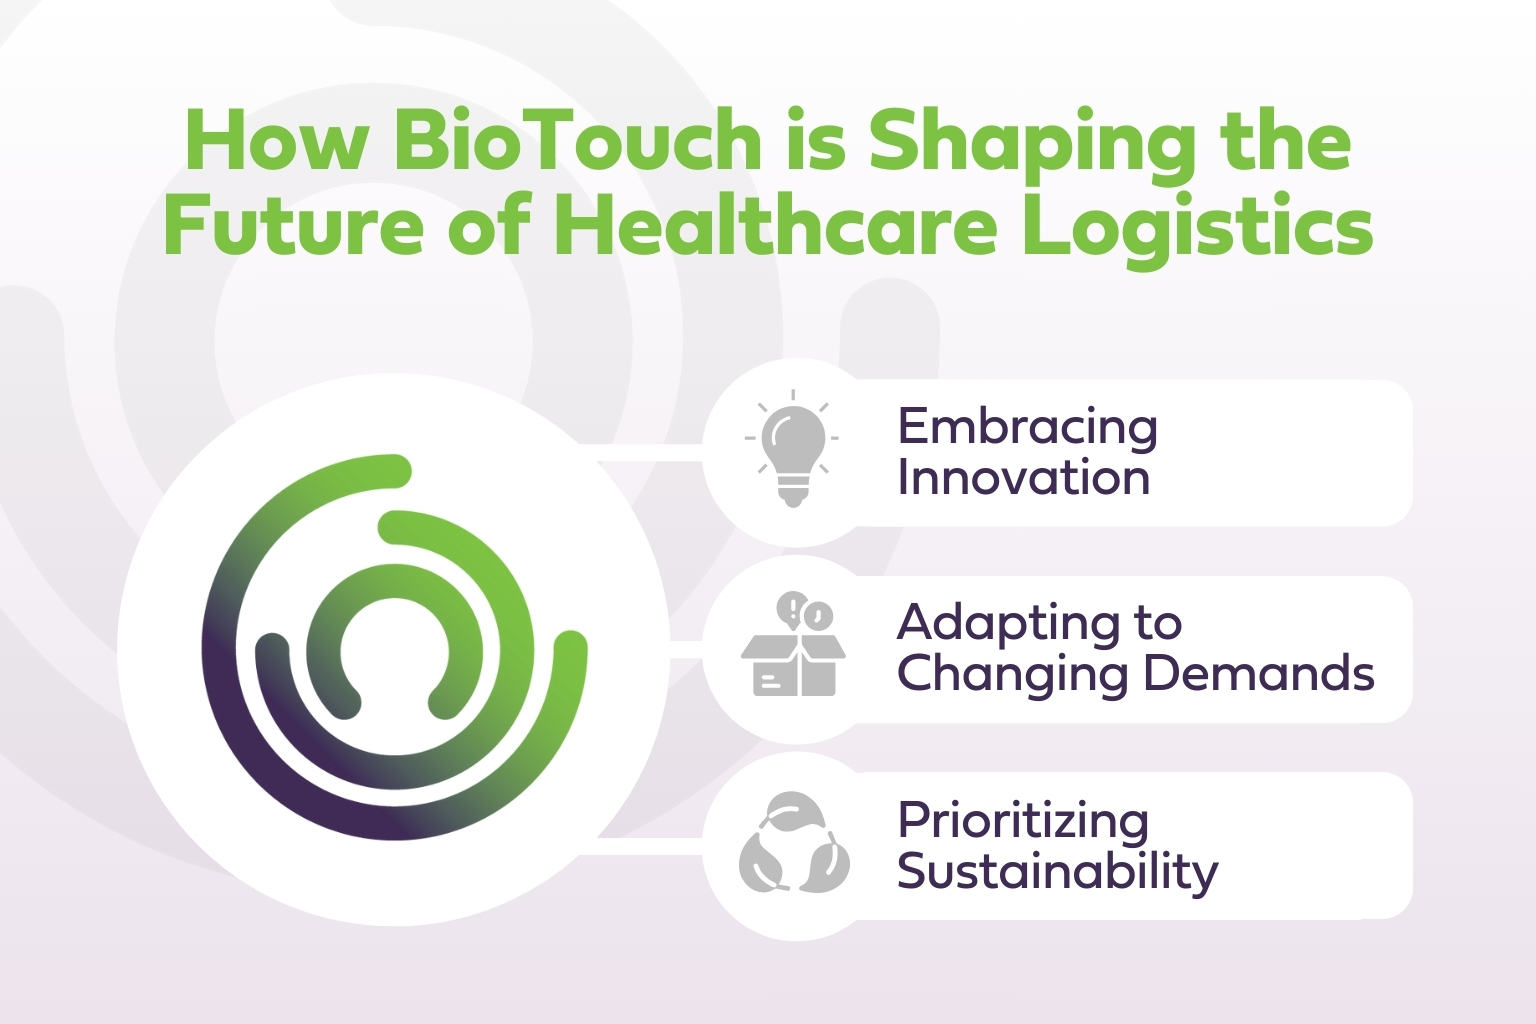 Infographic explaining how BioTouch is shaping the future of healthcare logistics.